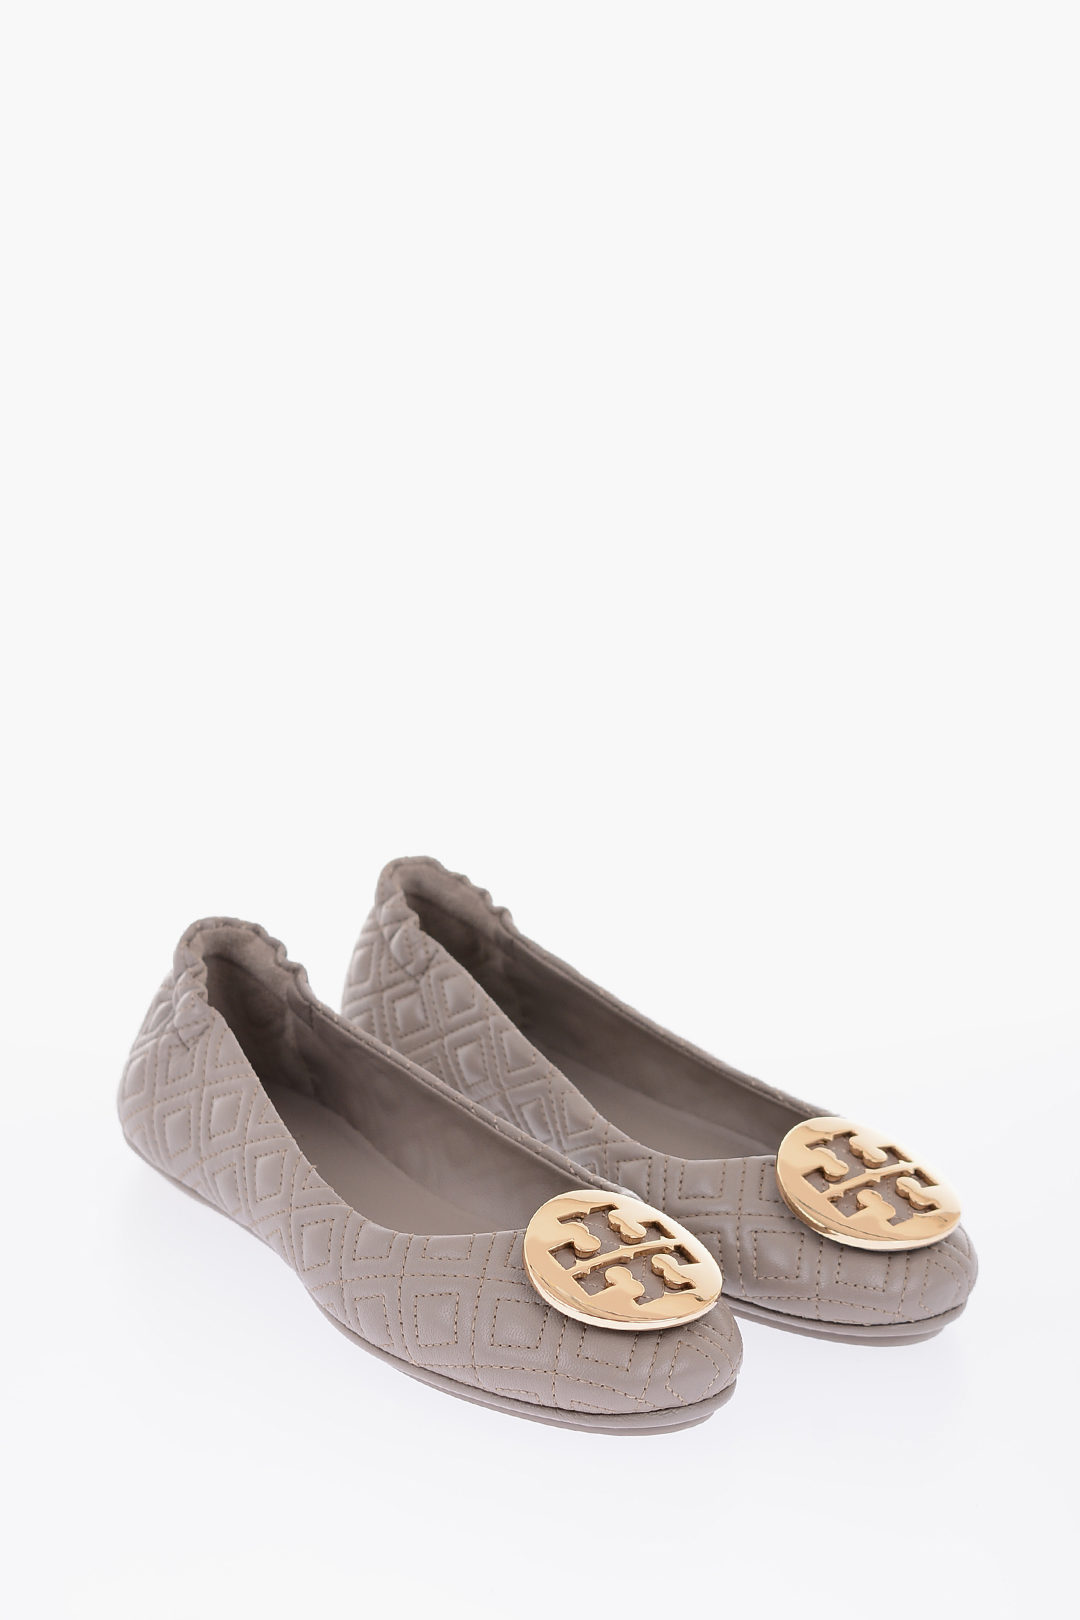 Tory Burch Quilted leather Ballet flats women - Glamood Outlet